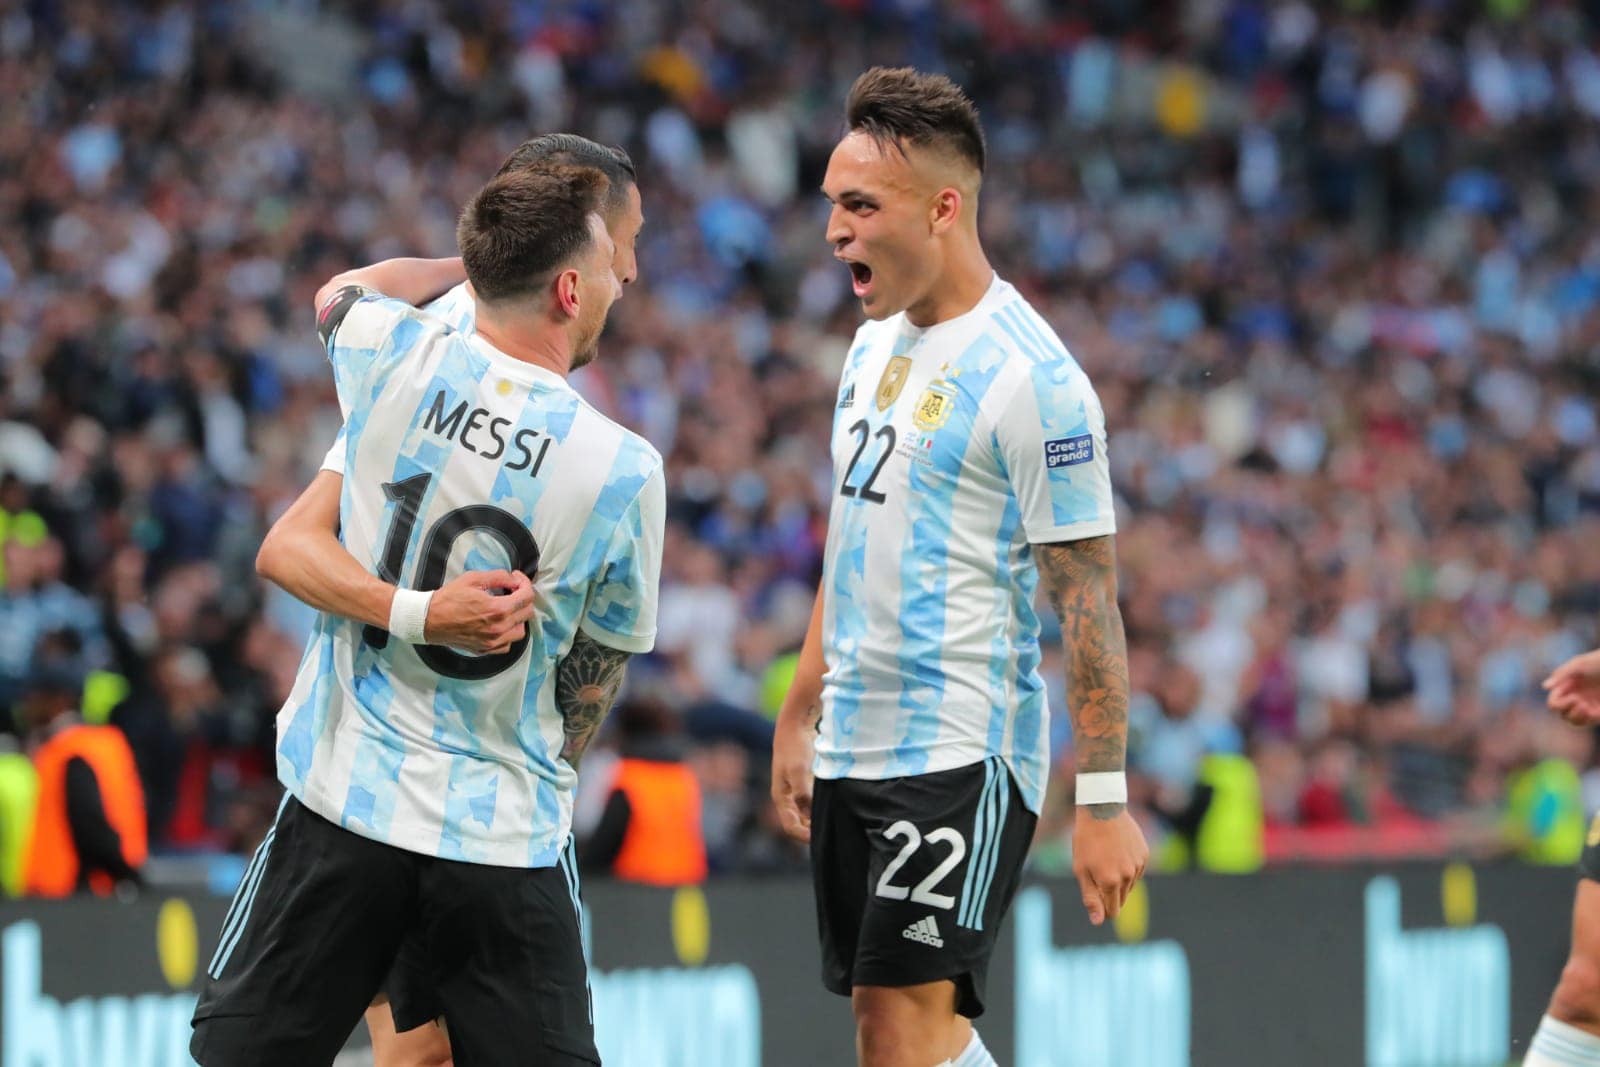 Lautaro Martínez together with Messi in the Argentine National Team